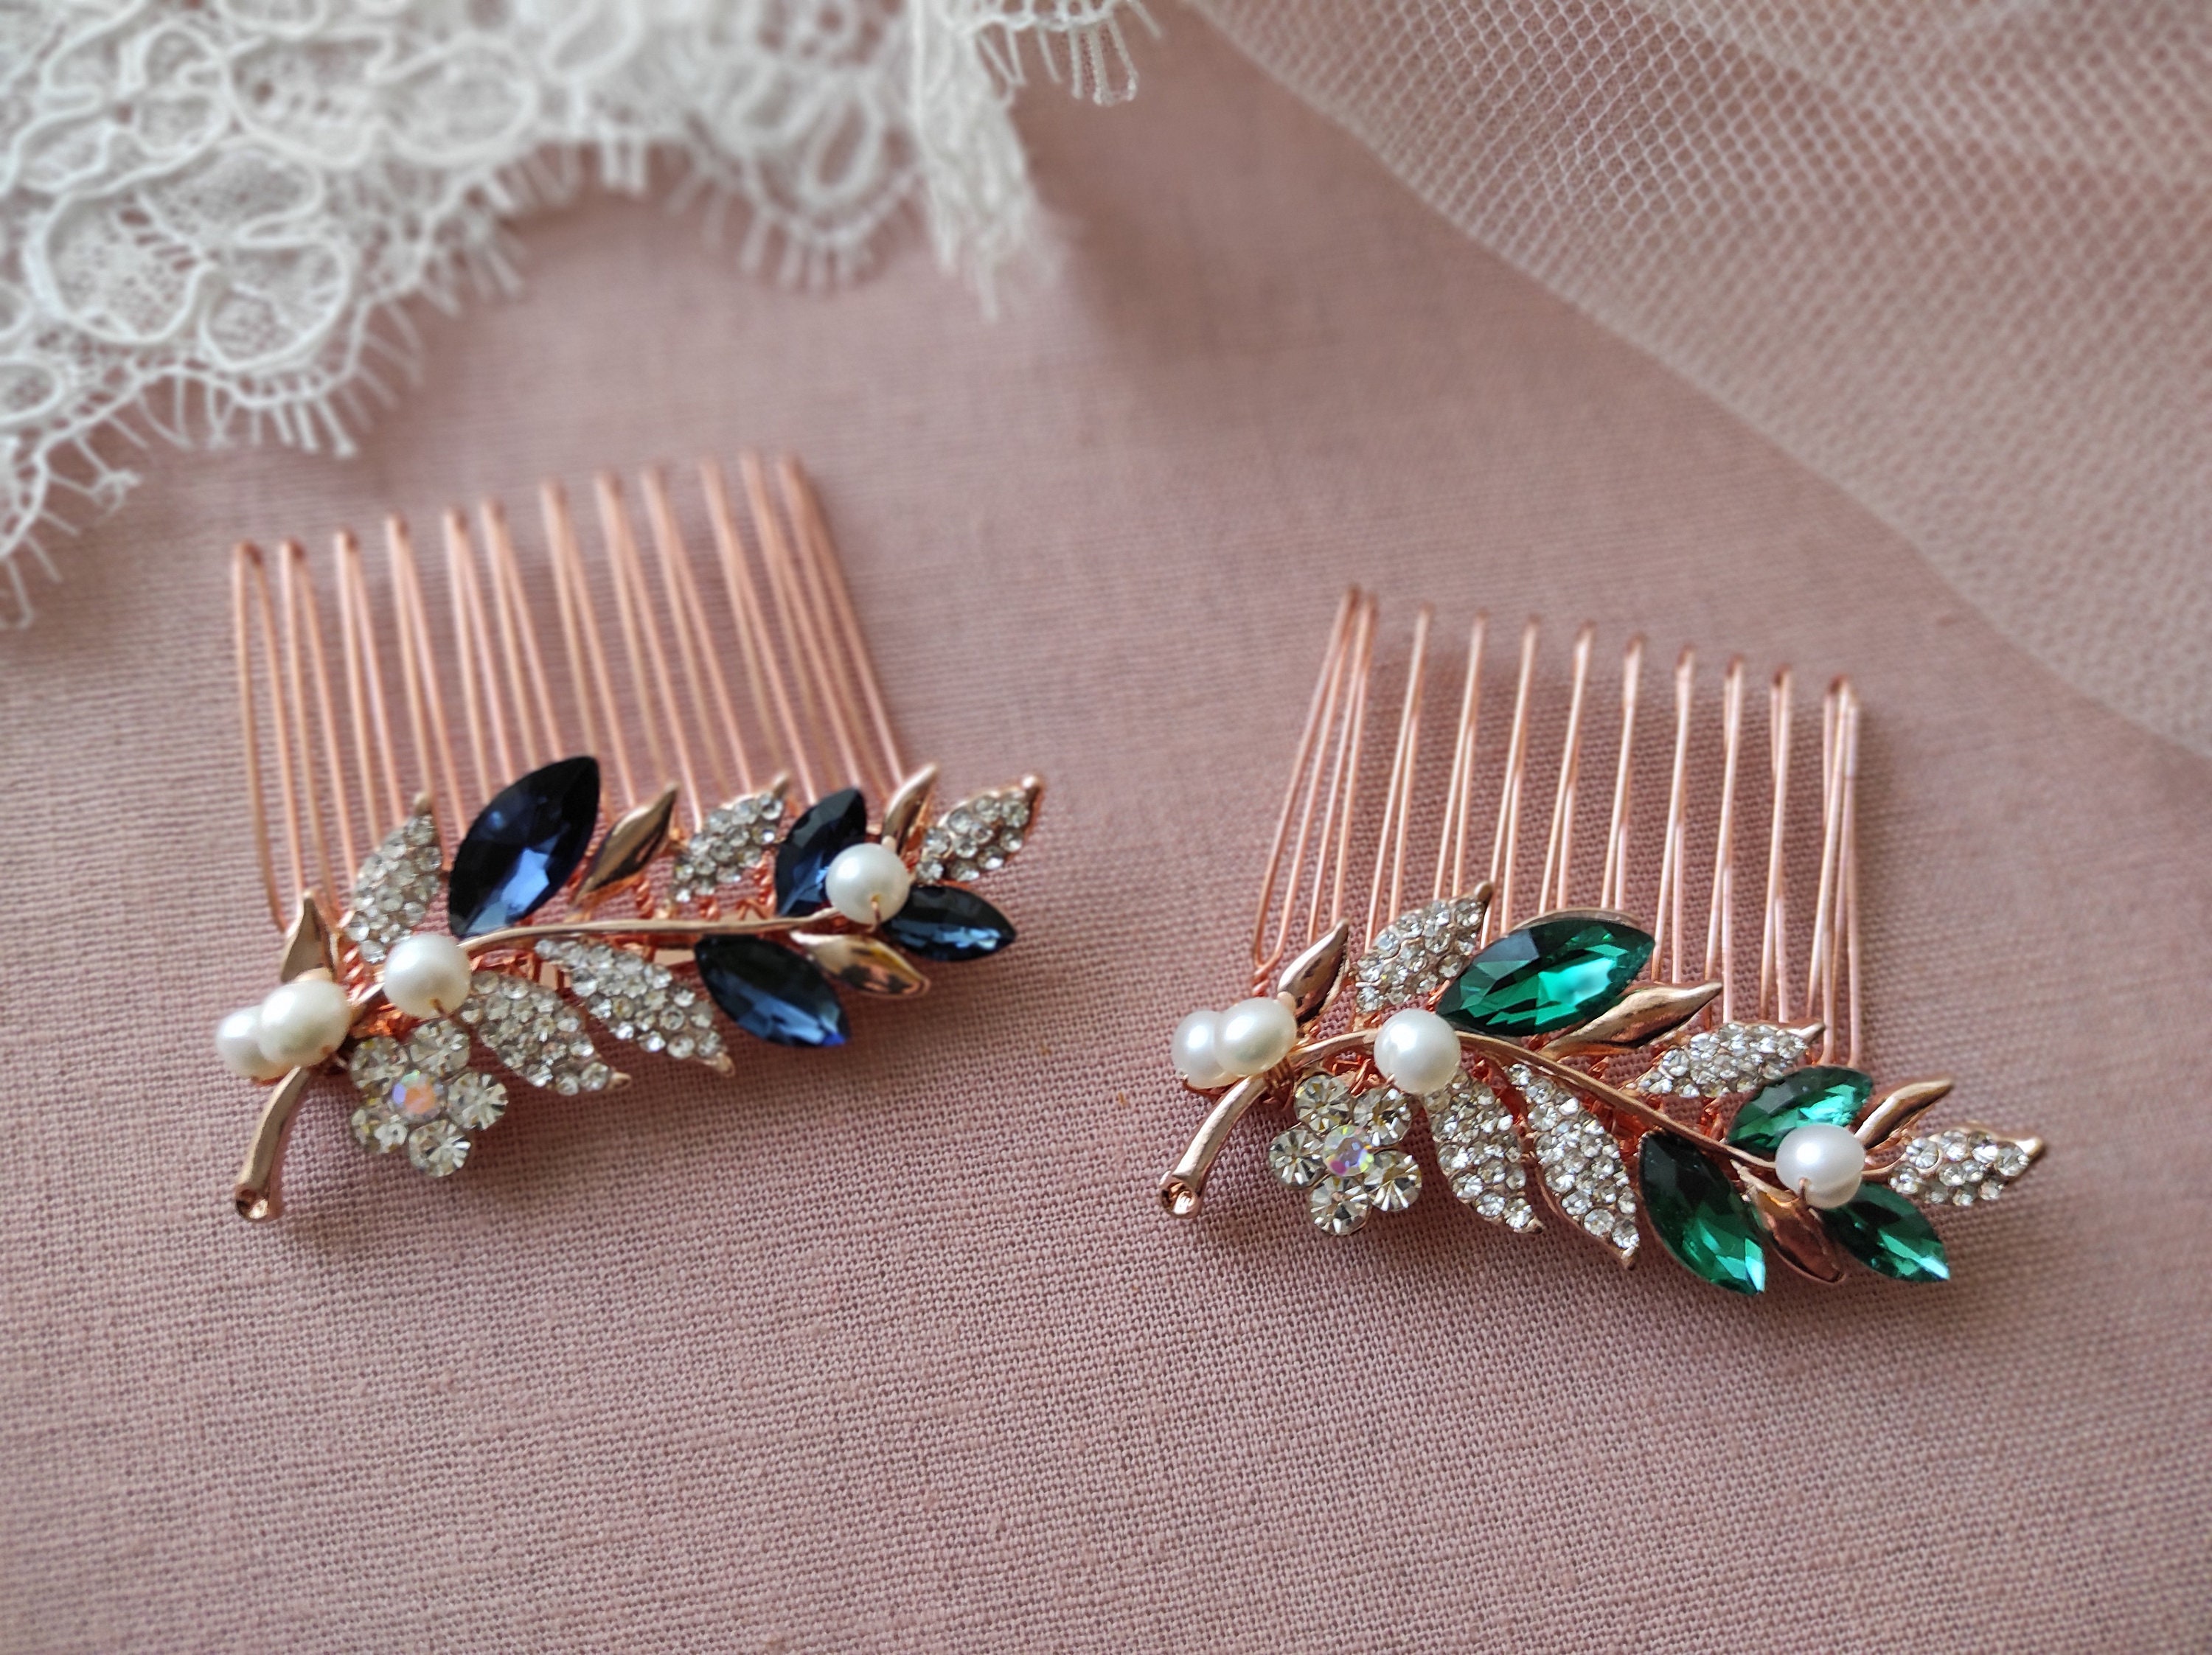 1. Rose Gold and Blue Hair Comb by Lulu Splendor - wide 5